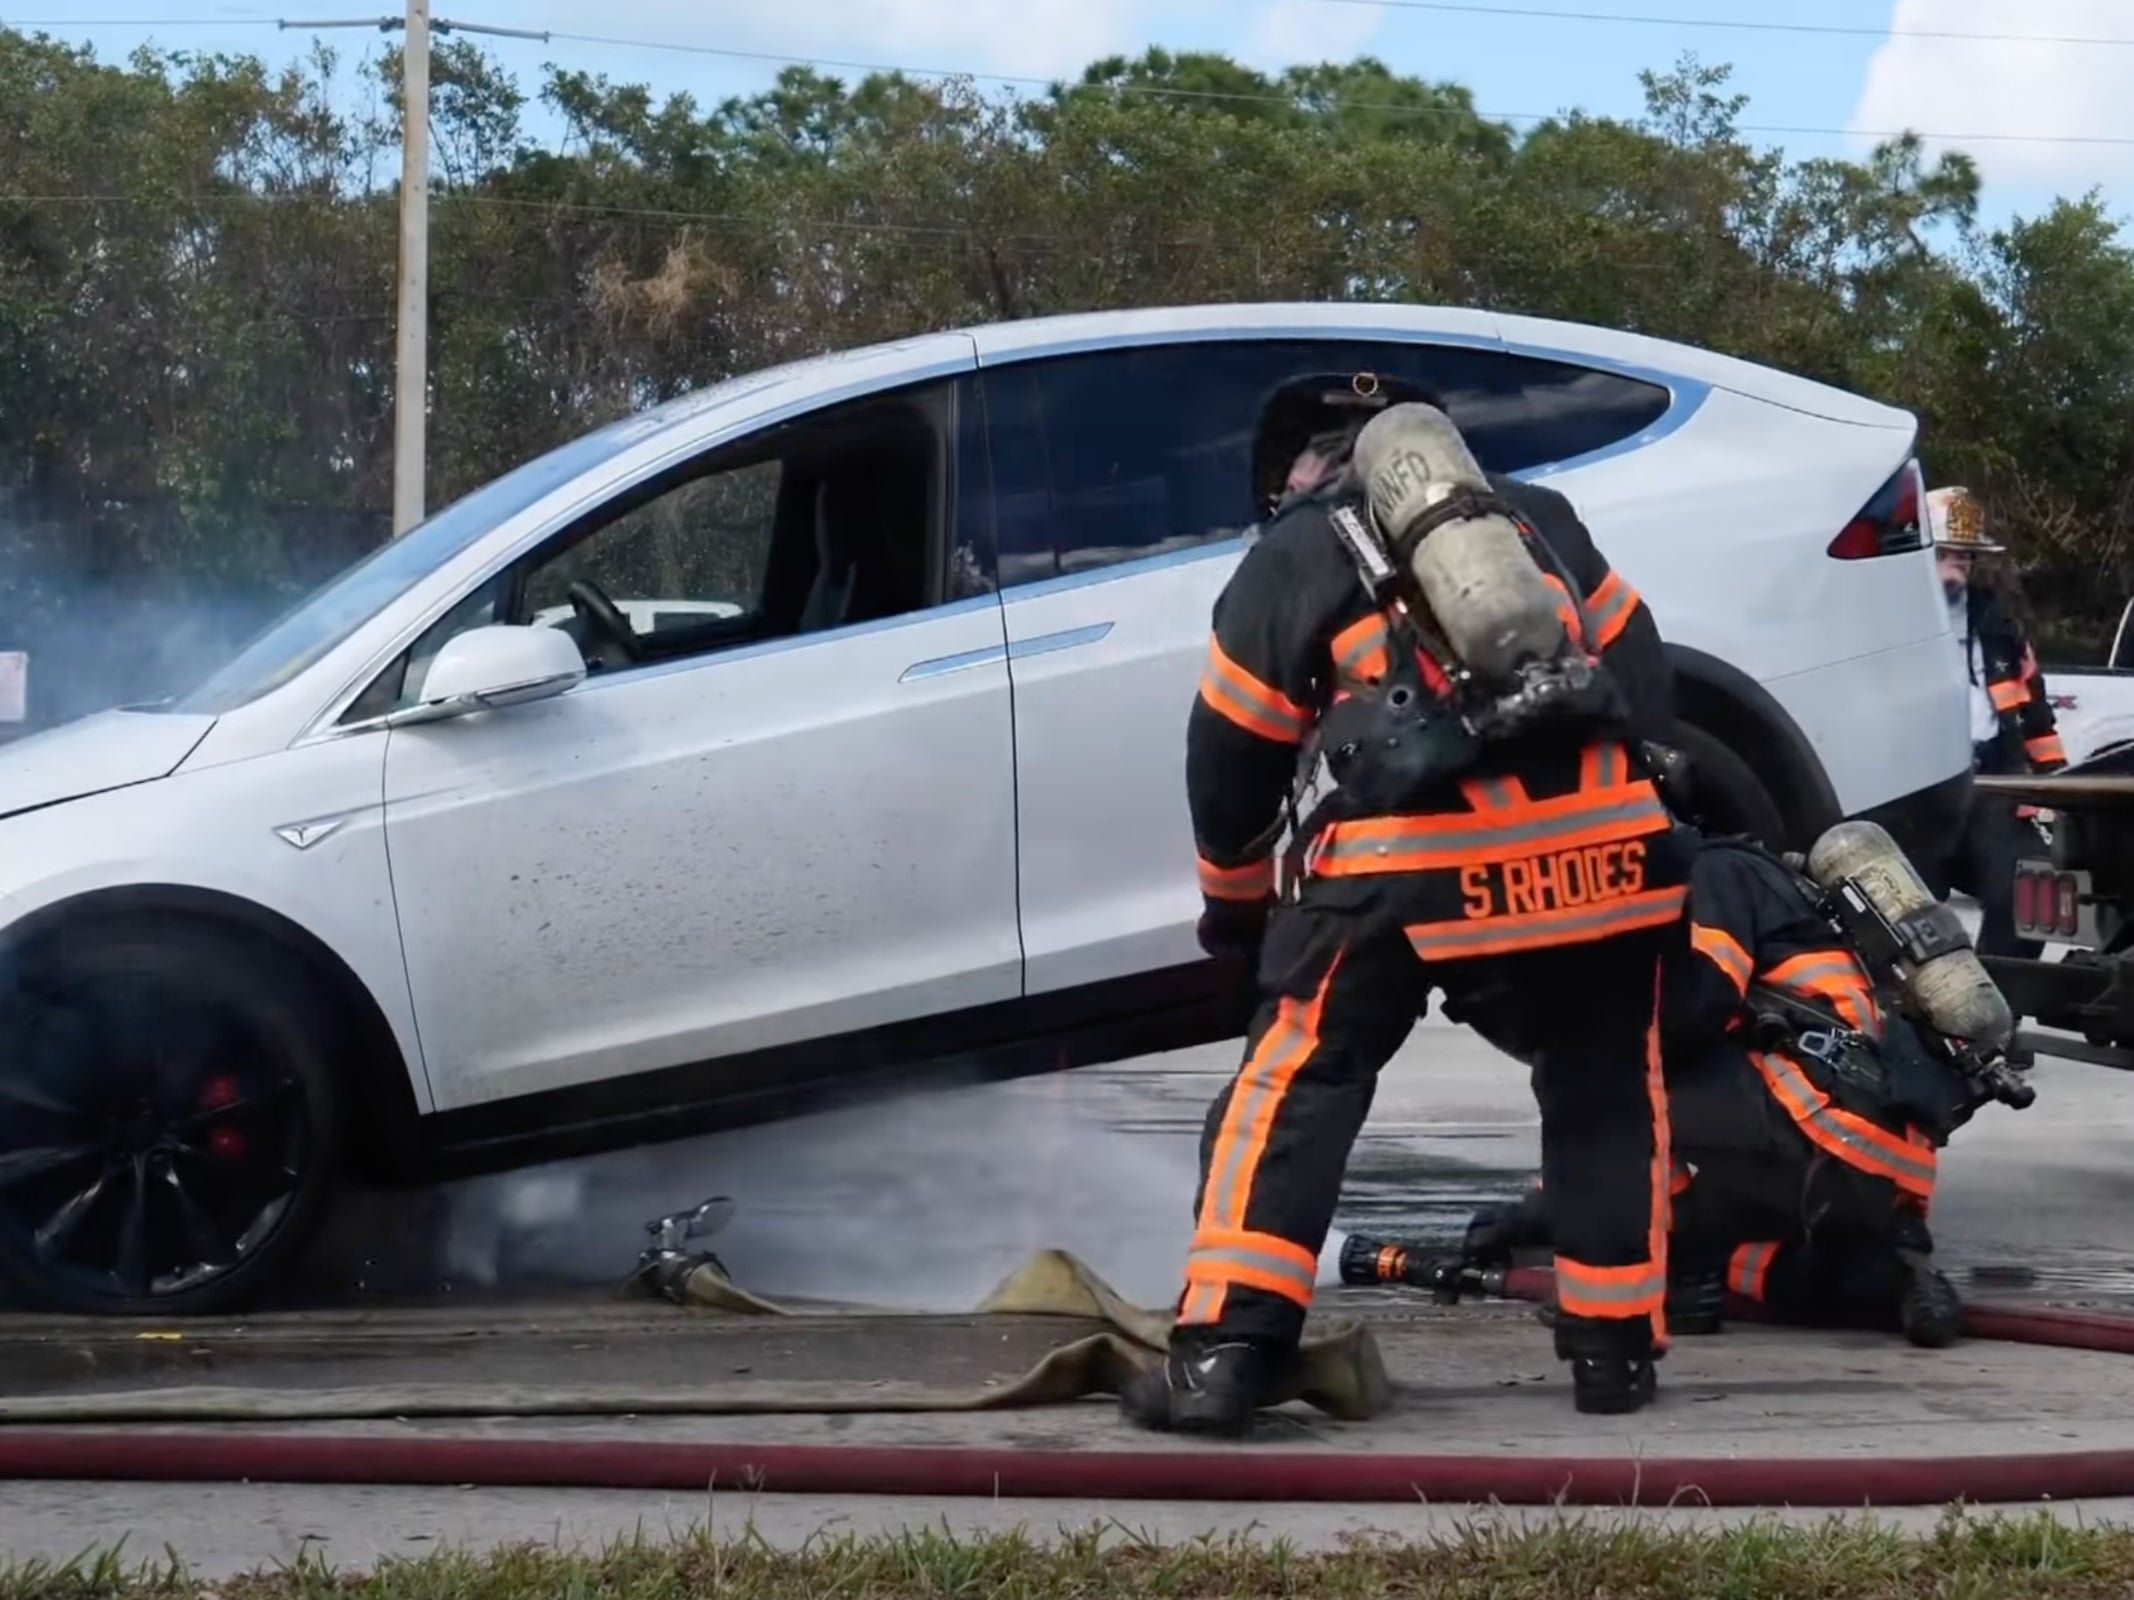 Firefighters in Florida attempt to put out a Tesla fire prompted by Hurricane Ian